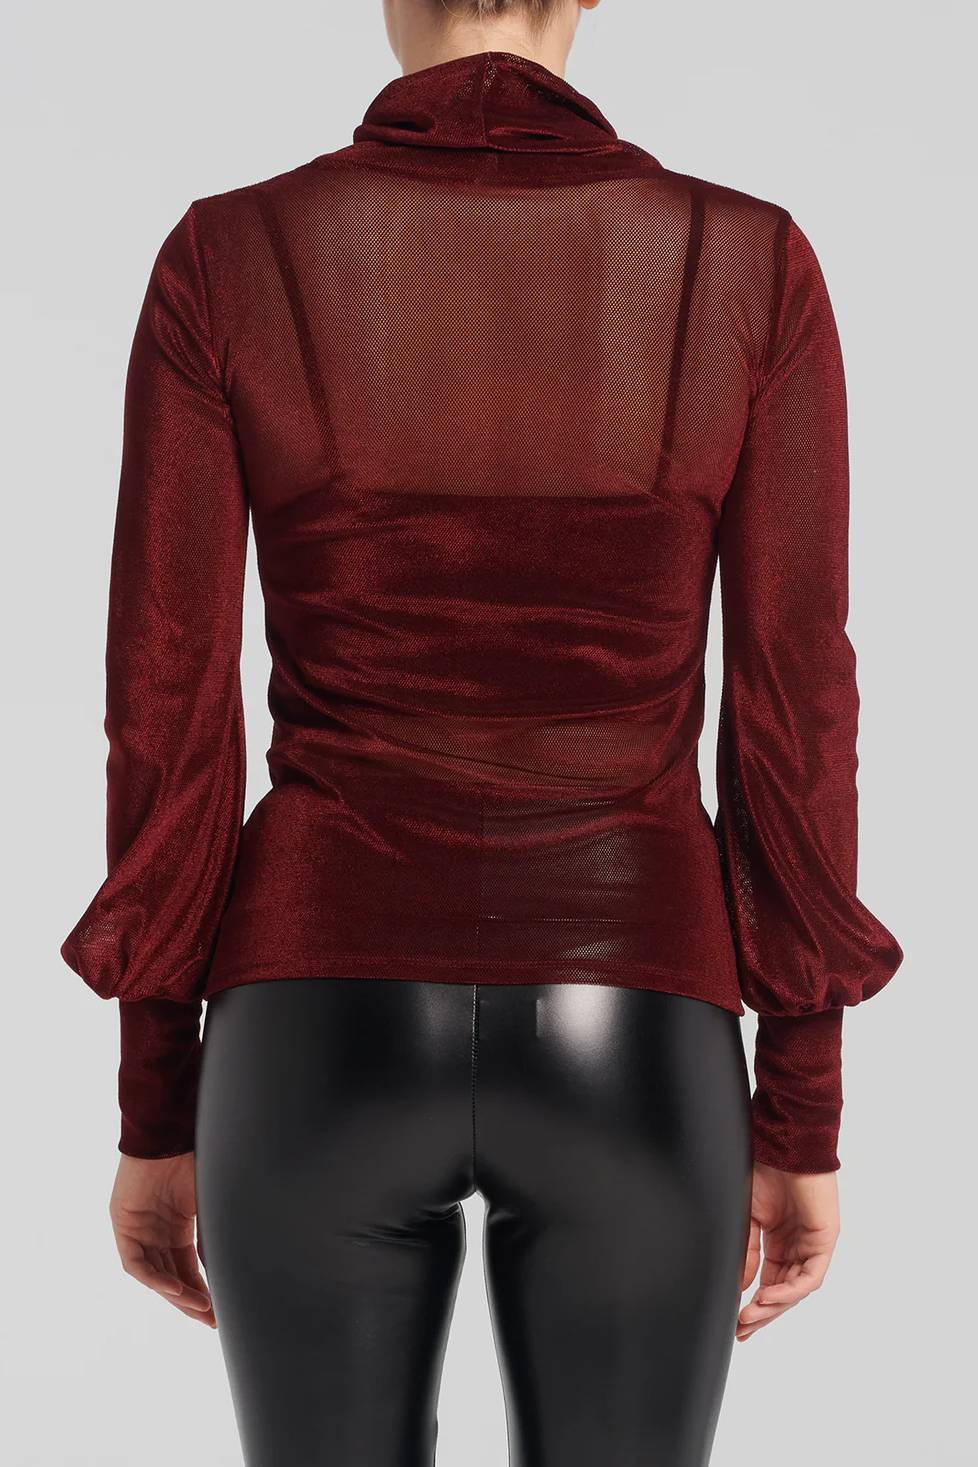 Back view of a woman wearing the Lavenza Top by Kollontai in Bordeaux with faux leather pants